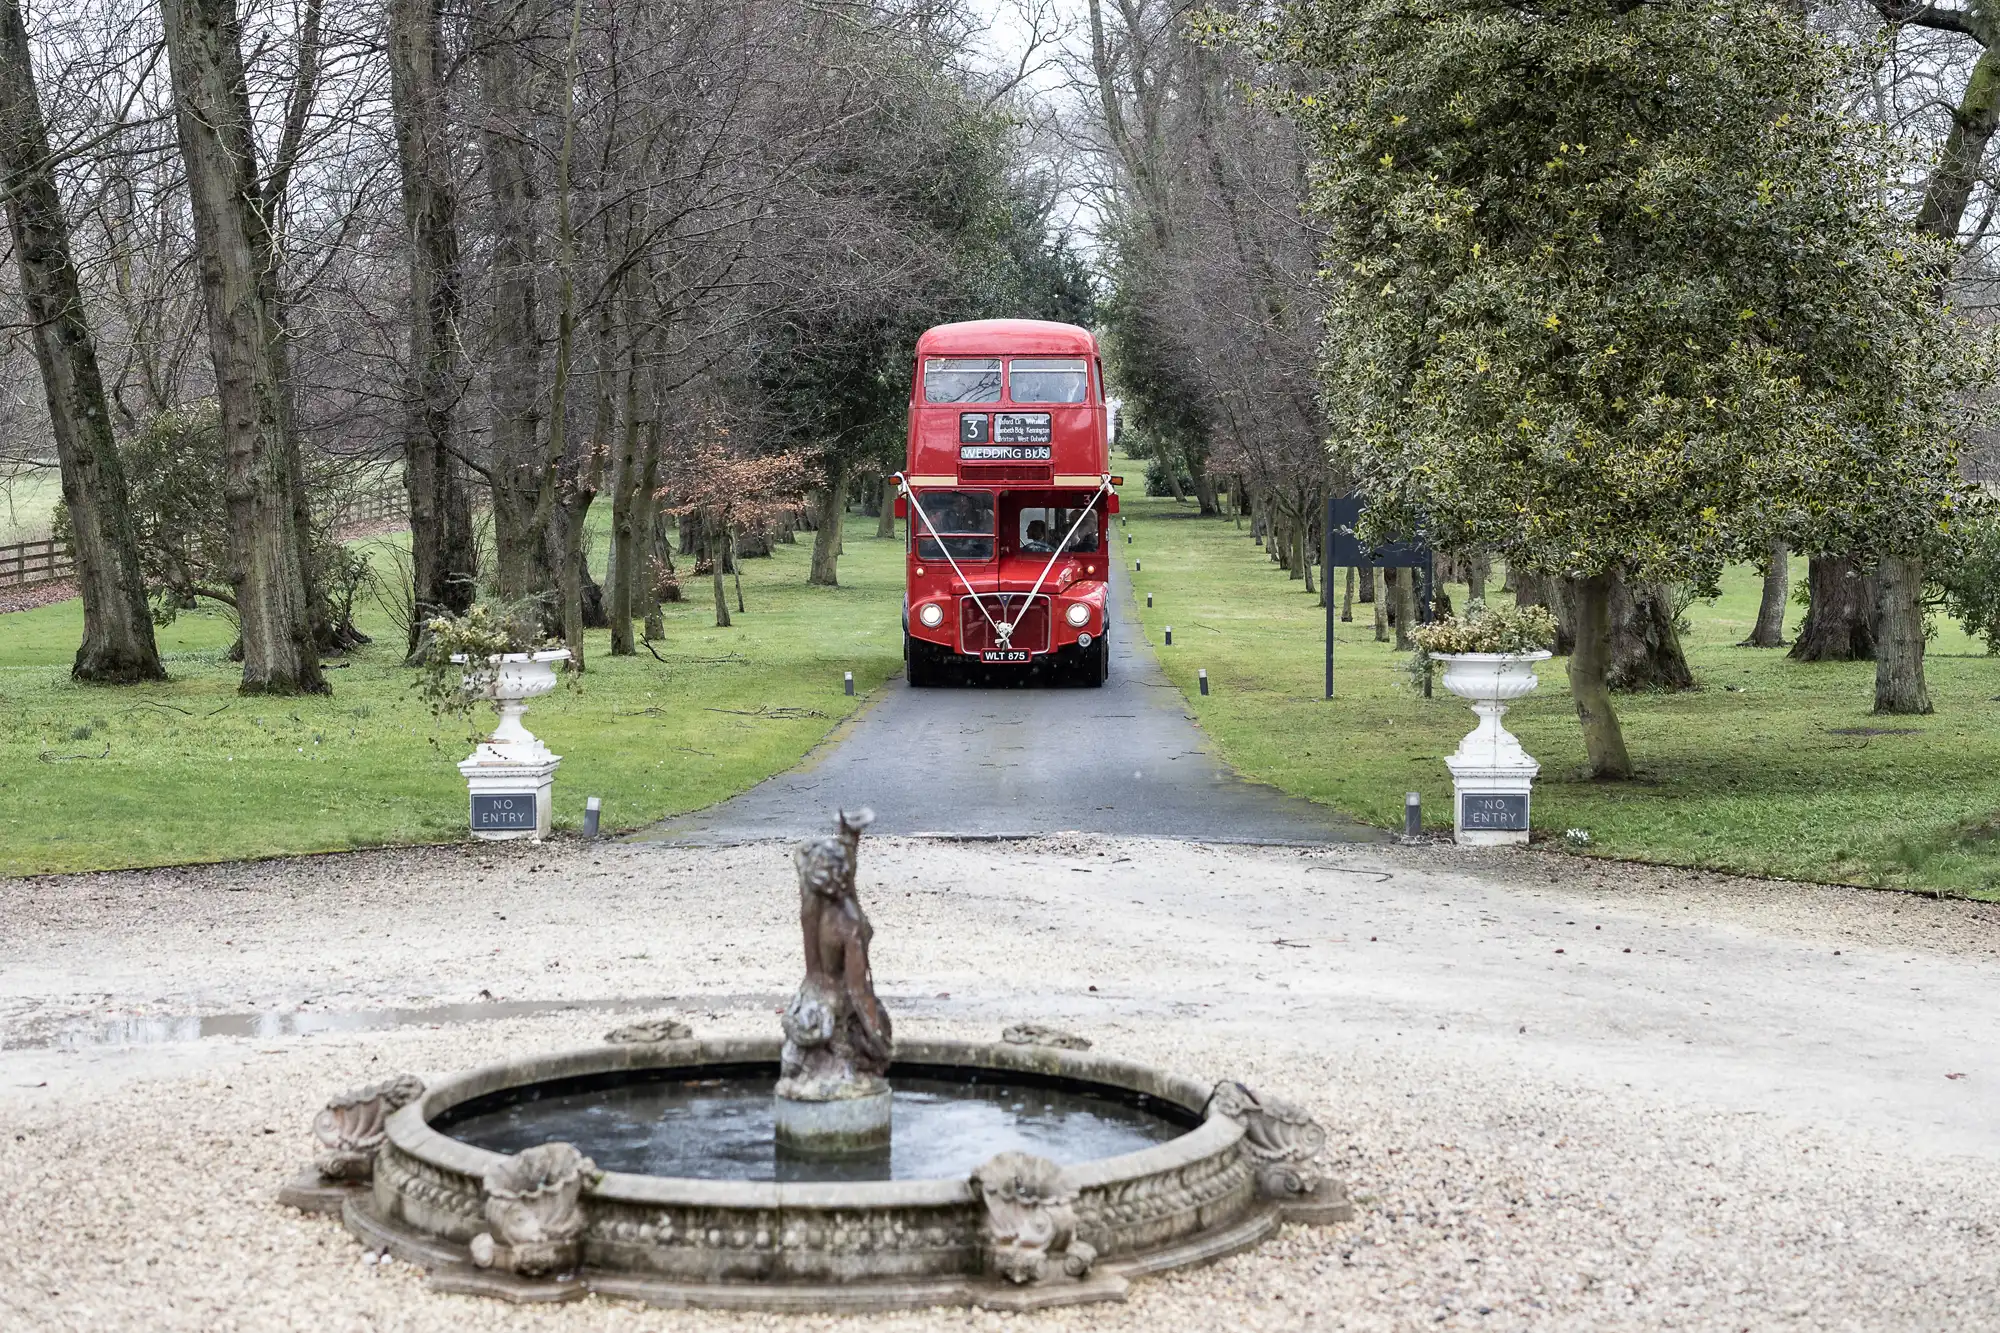 A red double-decker bus drives down a tree-lined driveway toward a circular fountain with statues in a park-like setting.